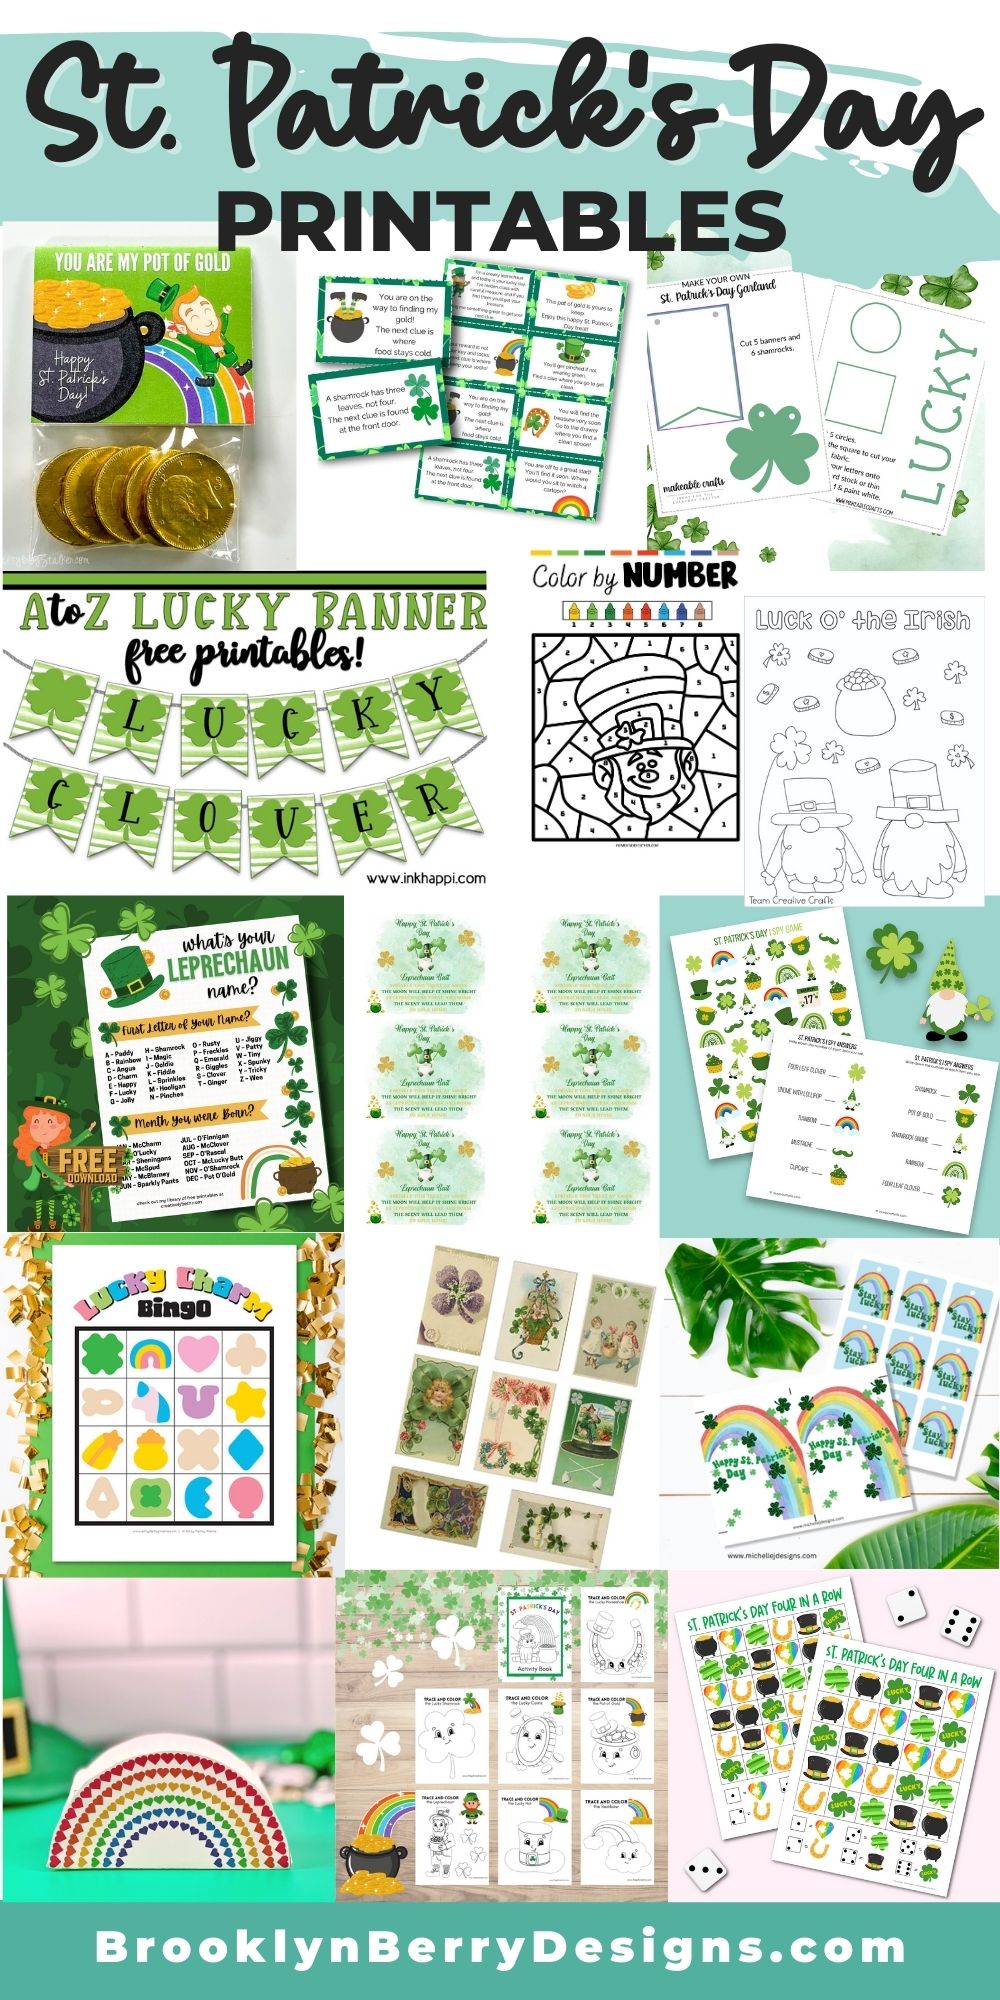 Collection of printables for St. Patrick's Day. Banners, gift tags, bag toppers, scavenger hunts, coloring pages, and games!